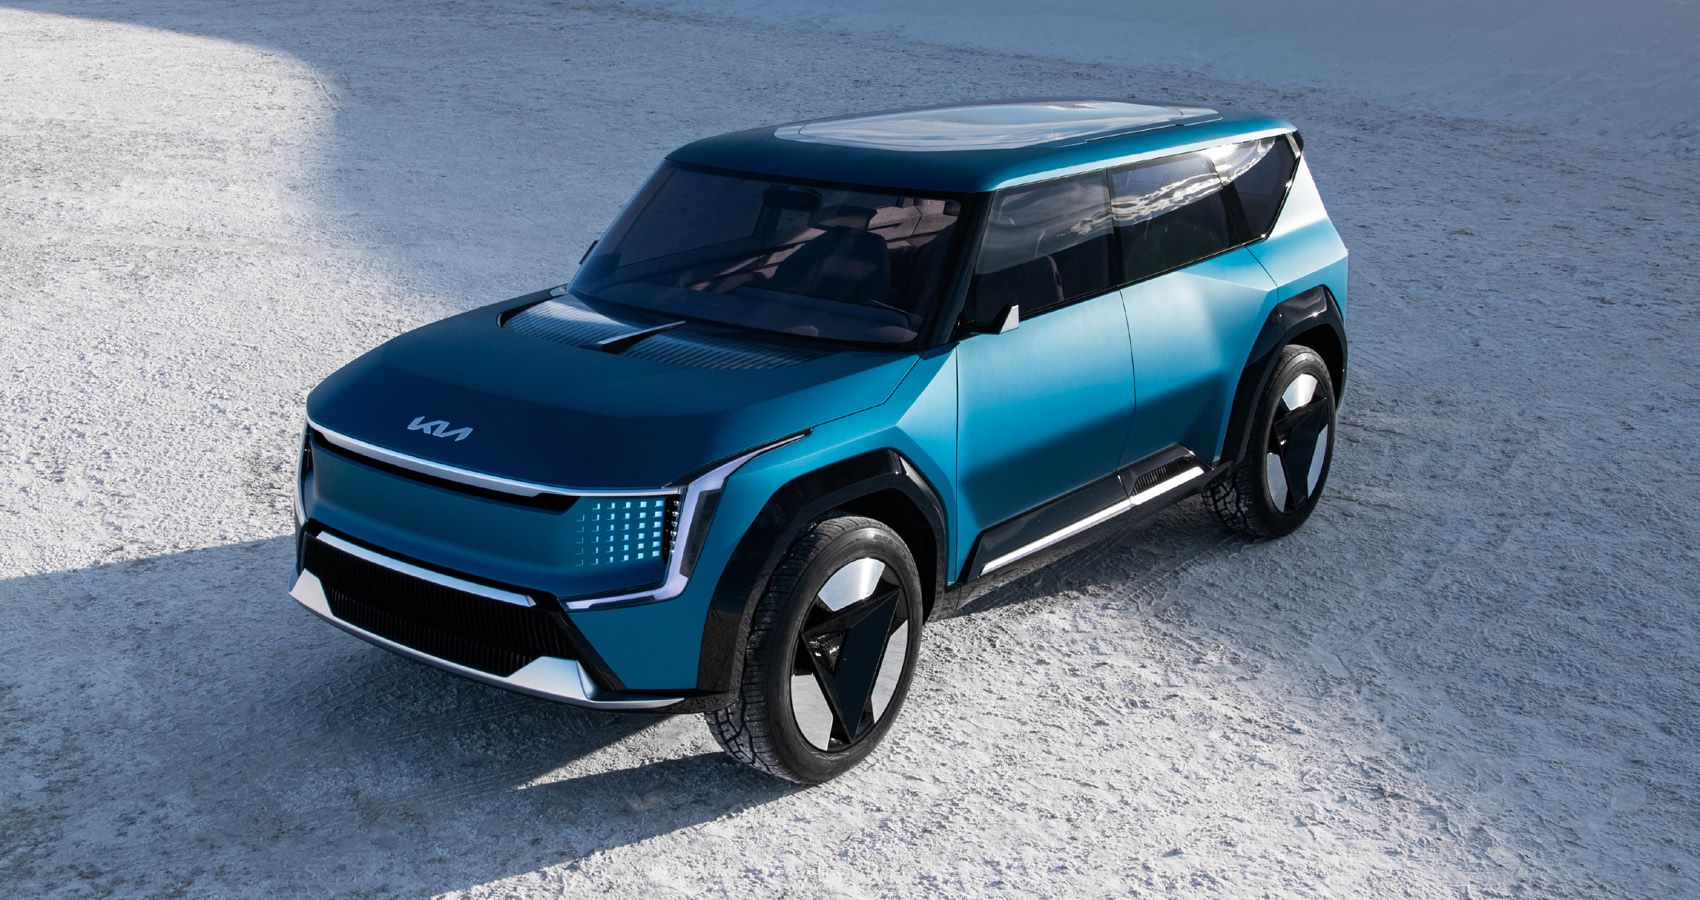 Forthcoming All-Electric Kia EV9 SUV In Concept Form